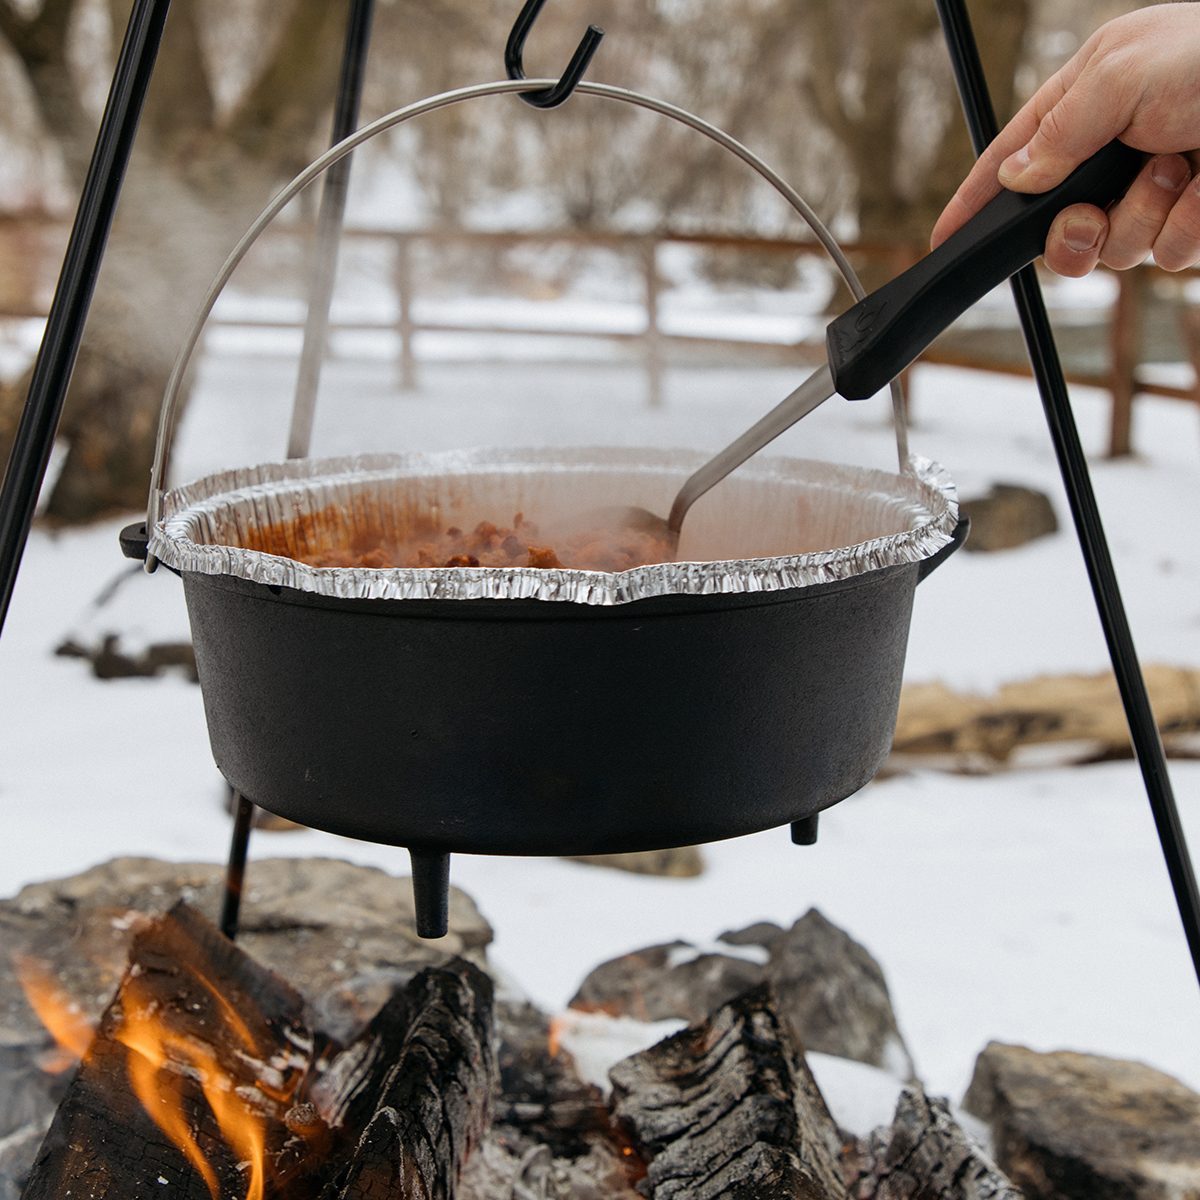 10 Must-Have Dutch Oven Accessories